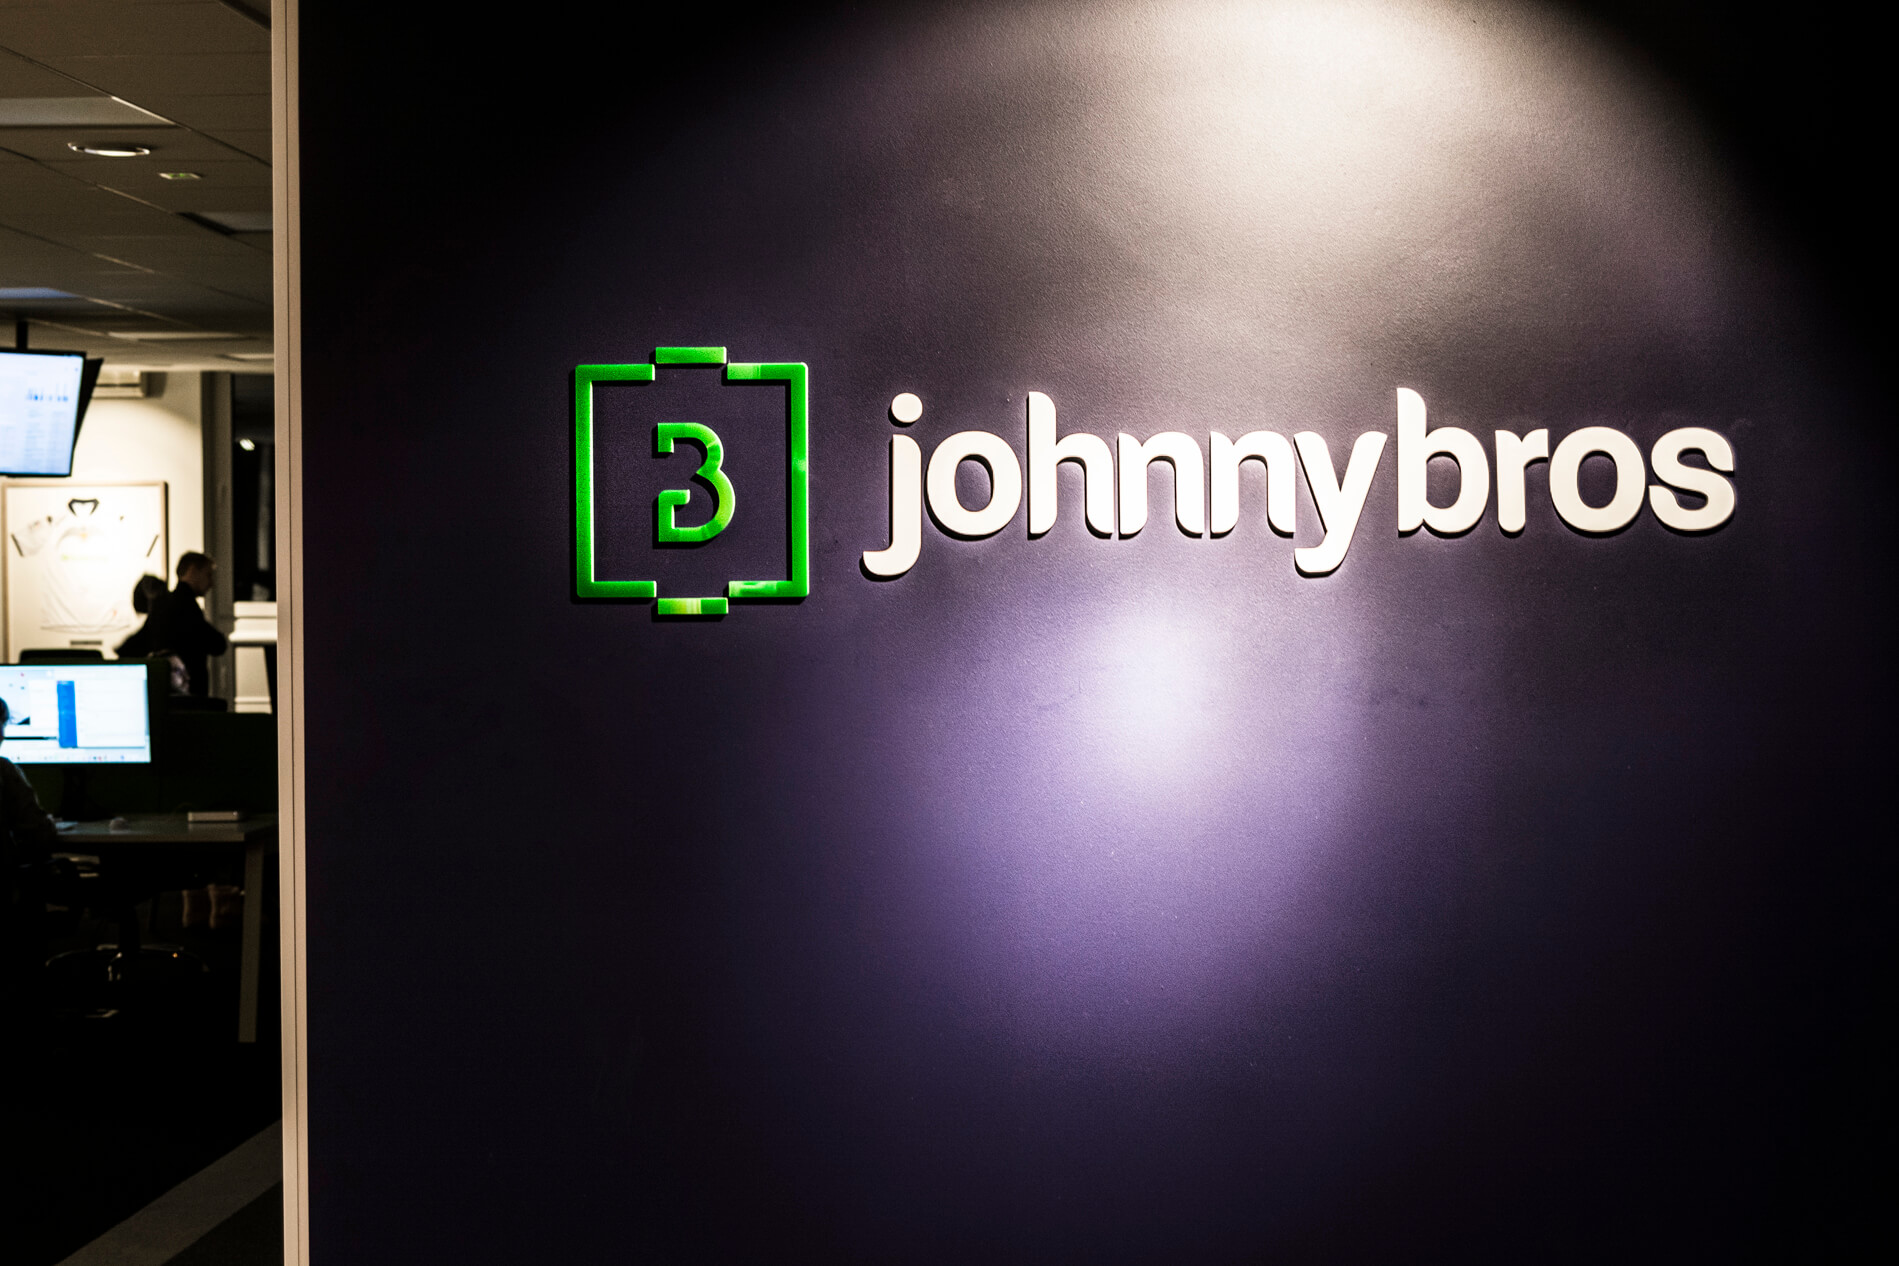 Johnnybros - Johnybros - logo and 3D letters made of acrylic cut by laser